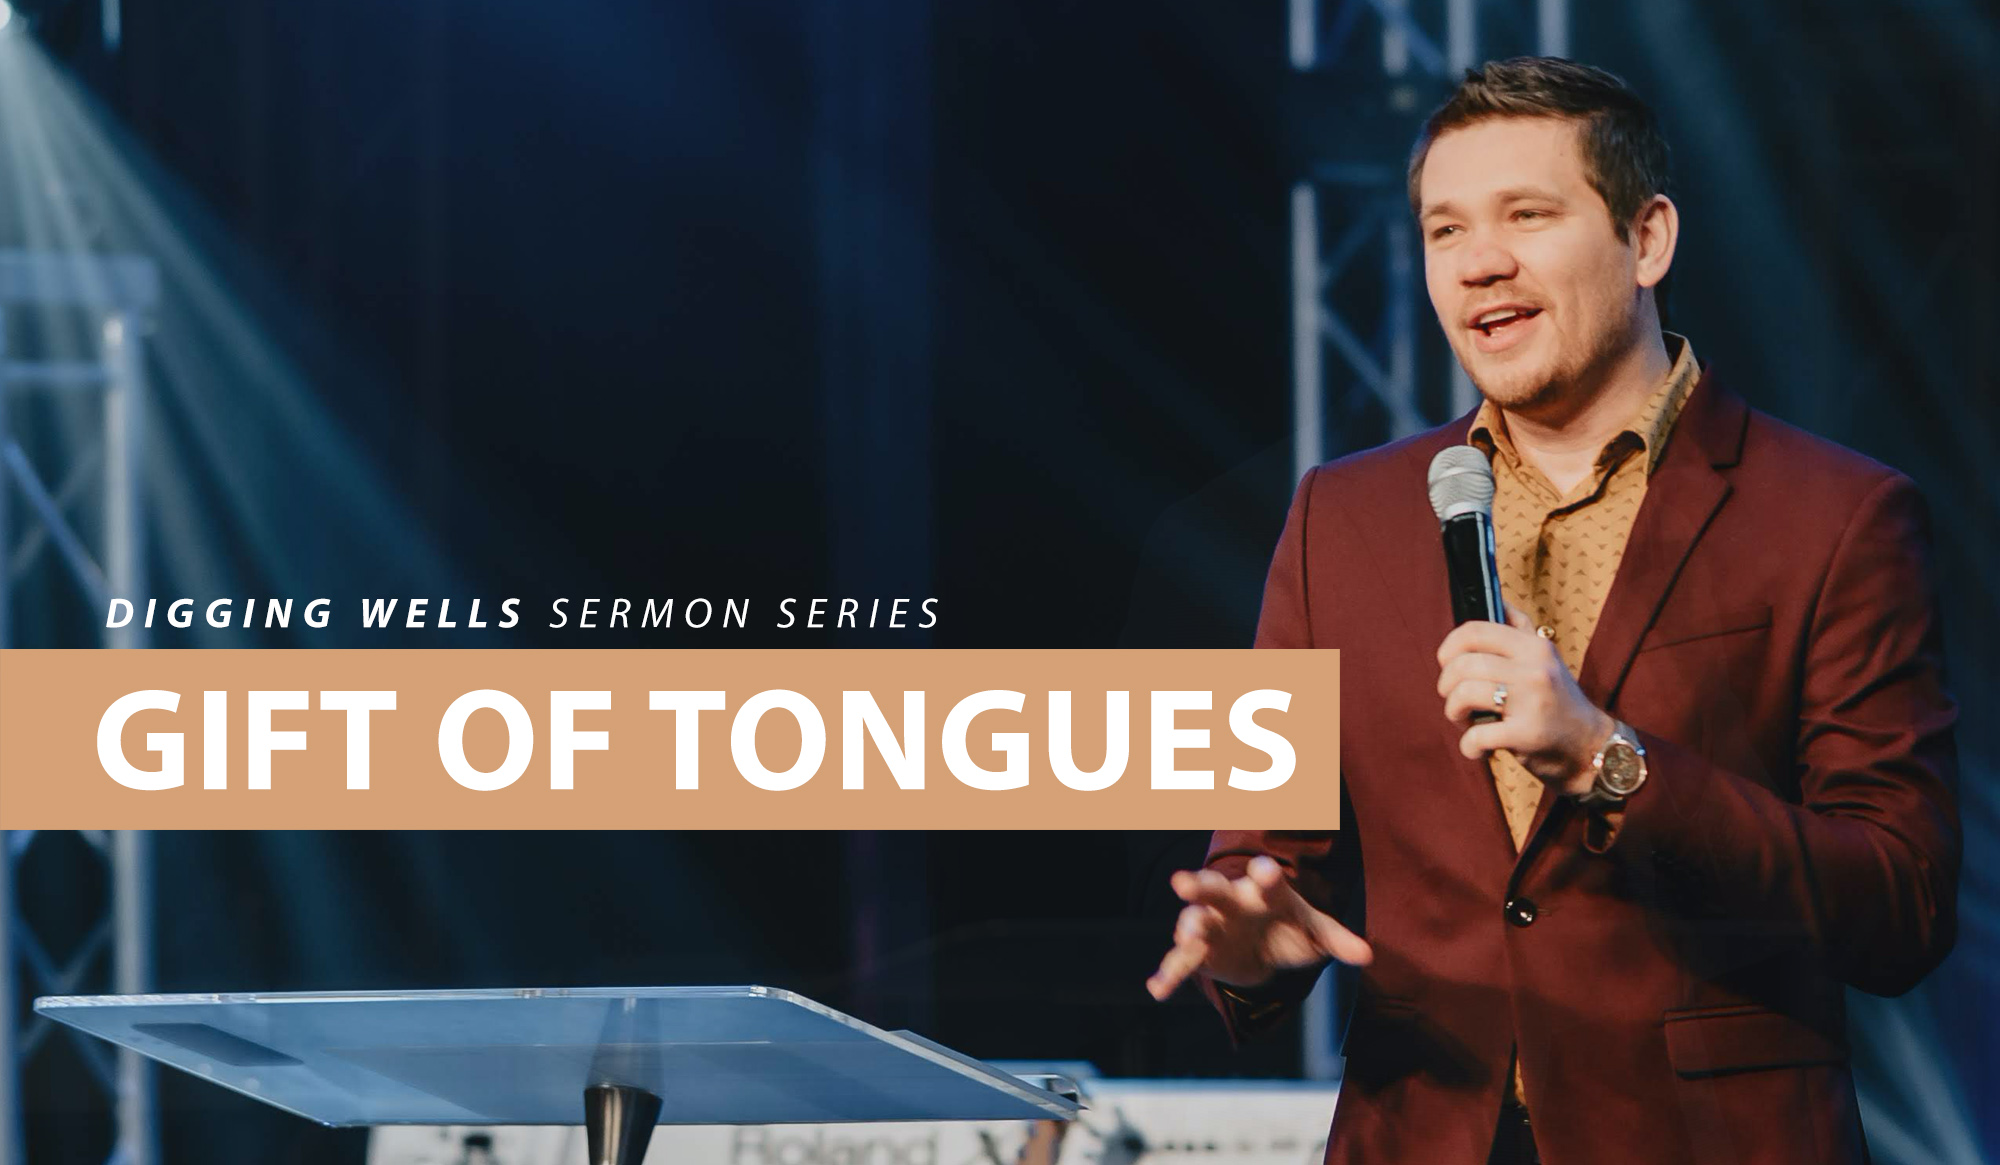 Featured image for “Gift of Tongues”